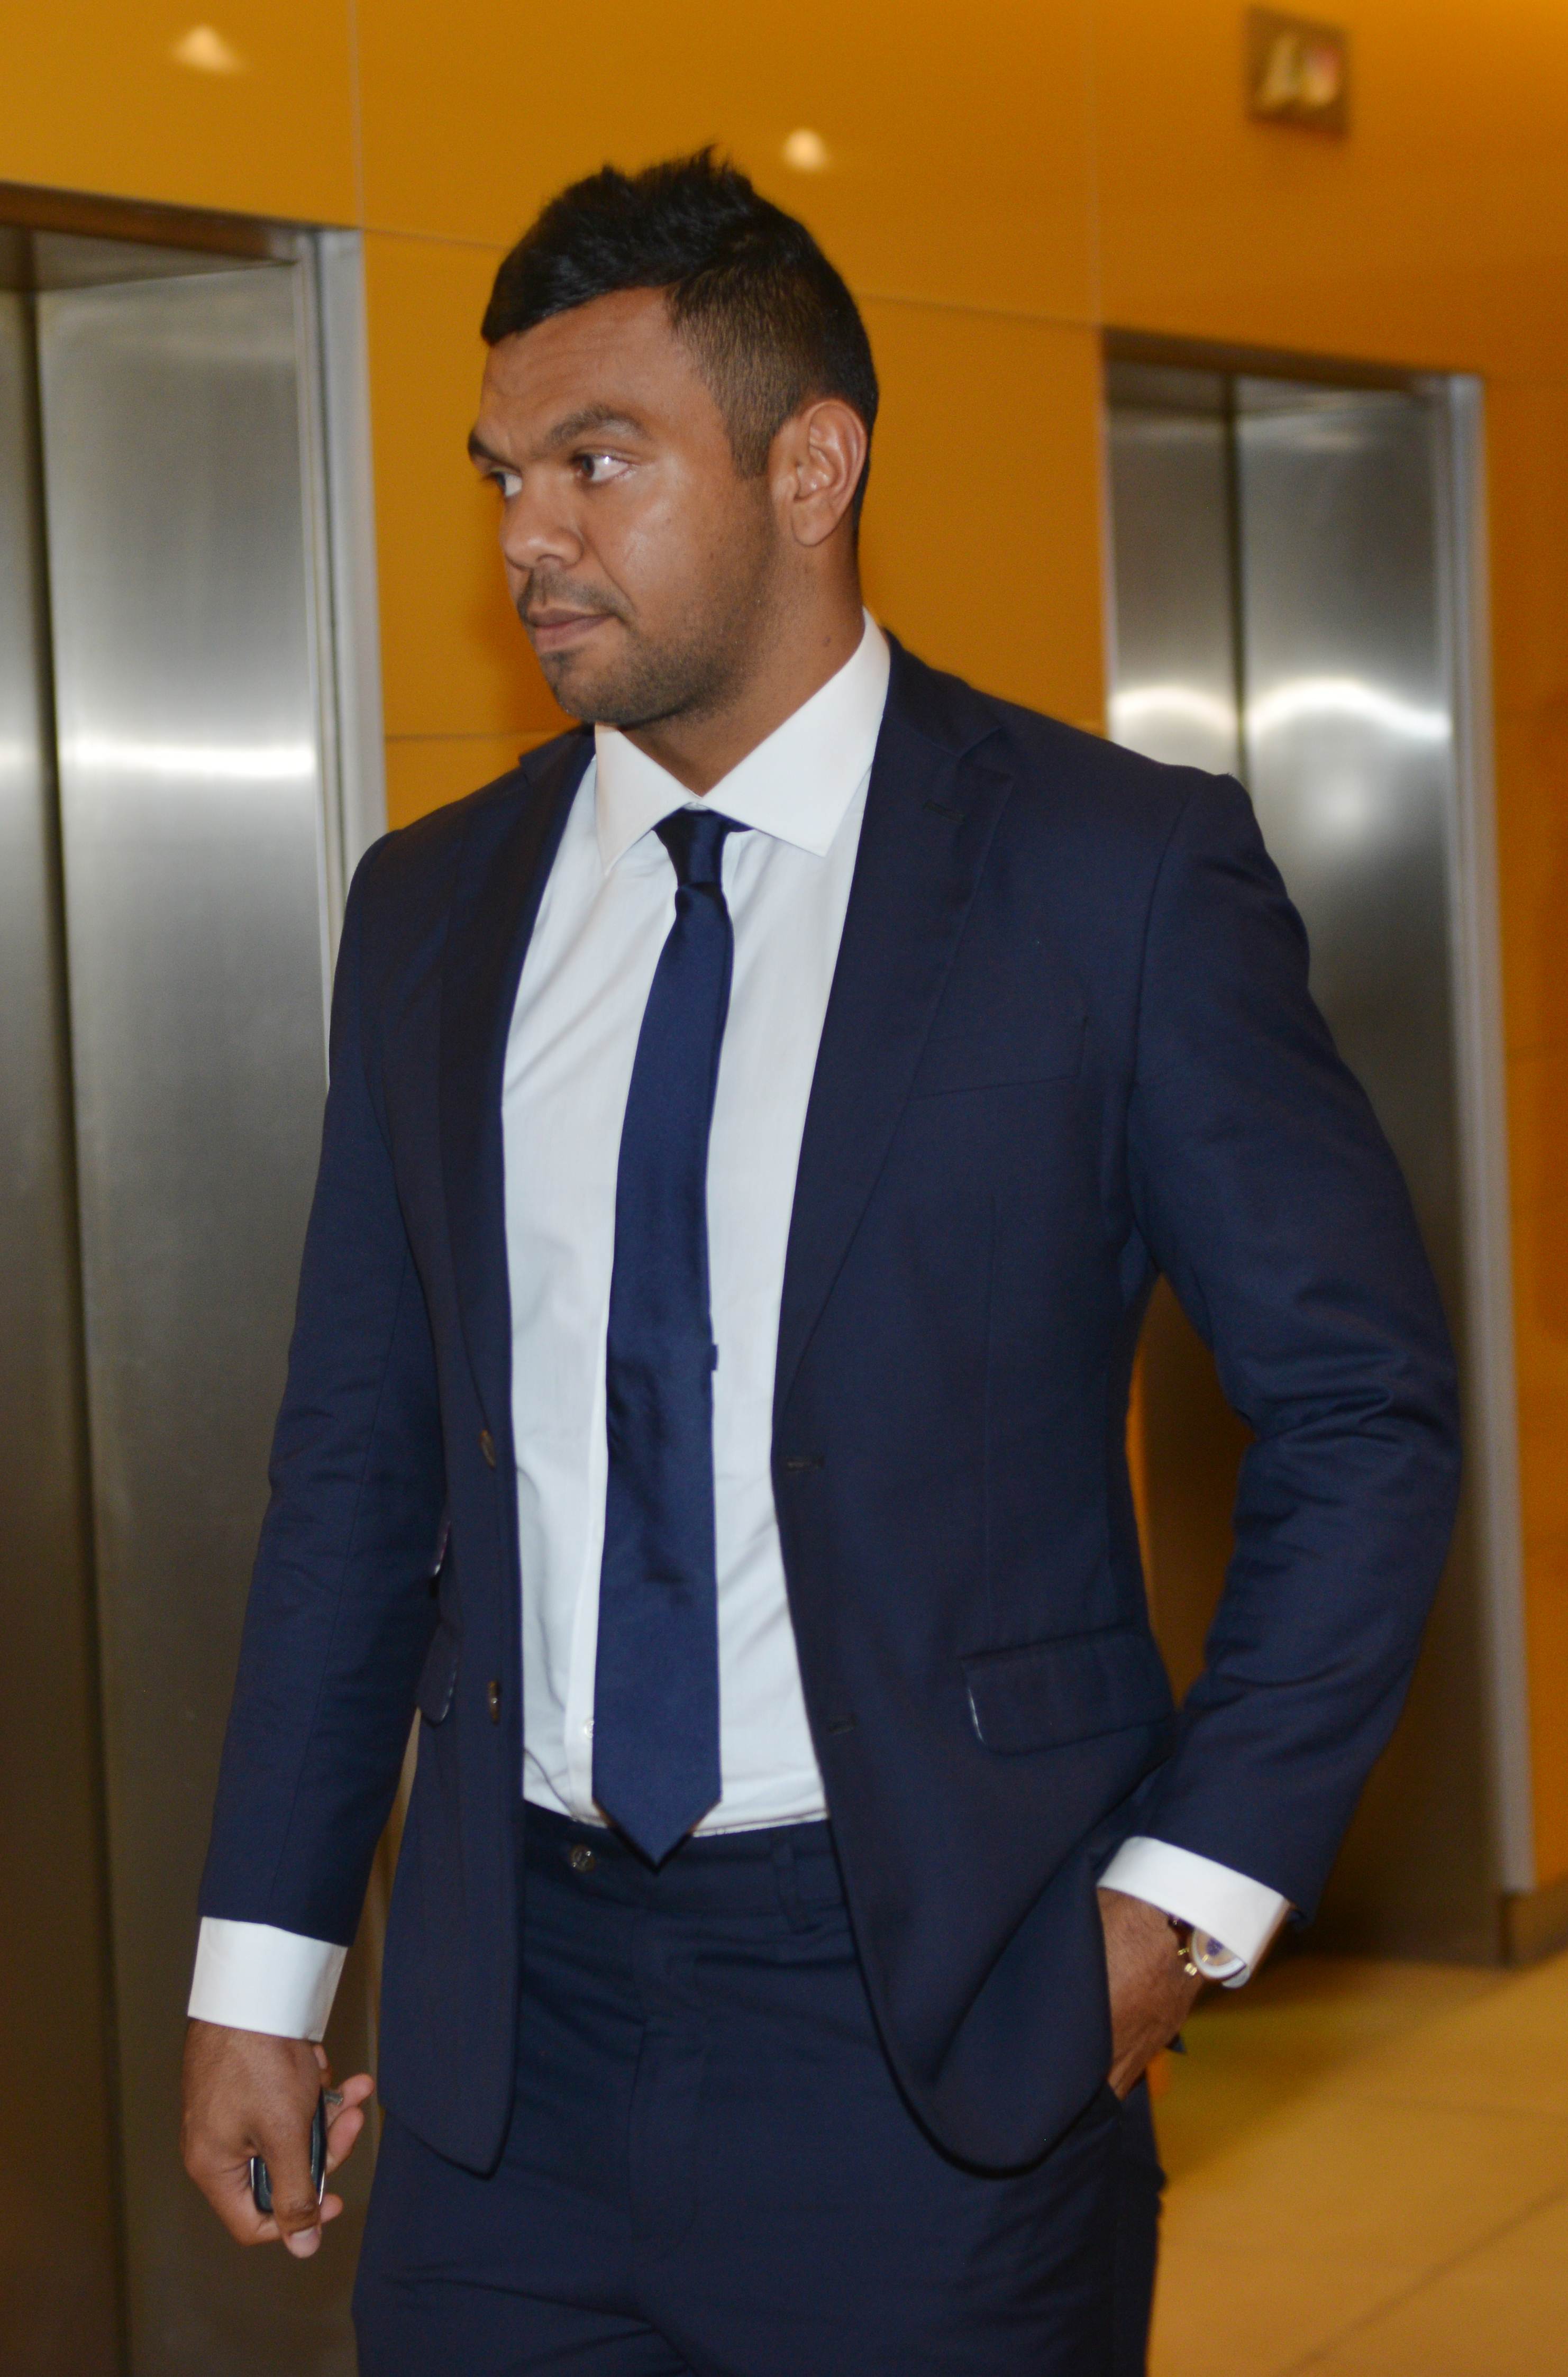 Kurtley Beale arrives for his ARU code of conduct tribunal hearing on Friday. Photos: AFP